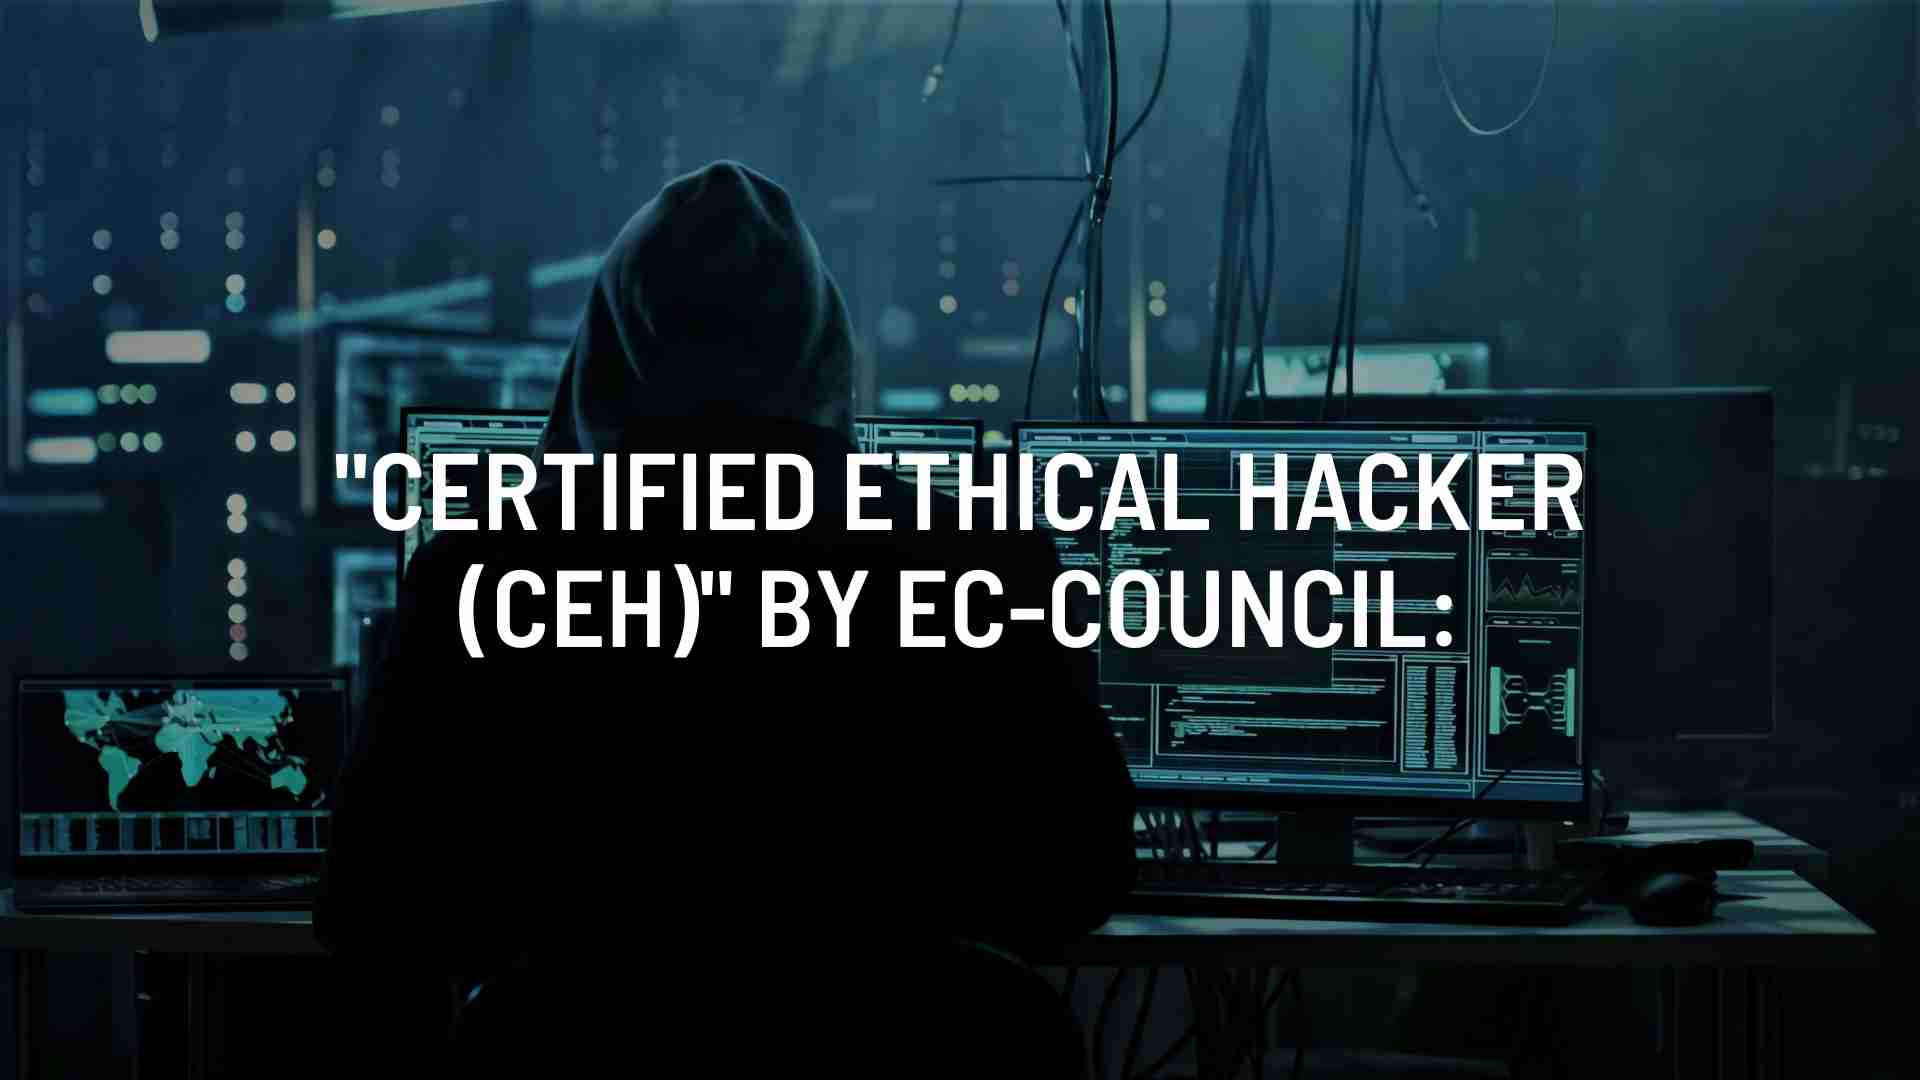 "Certified Ethical Hacker (CEH)" by EC-Council: